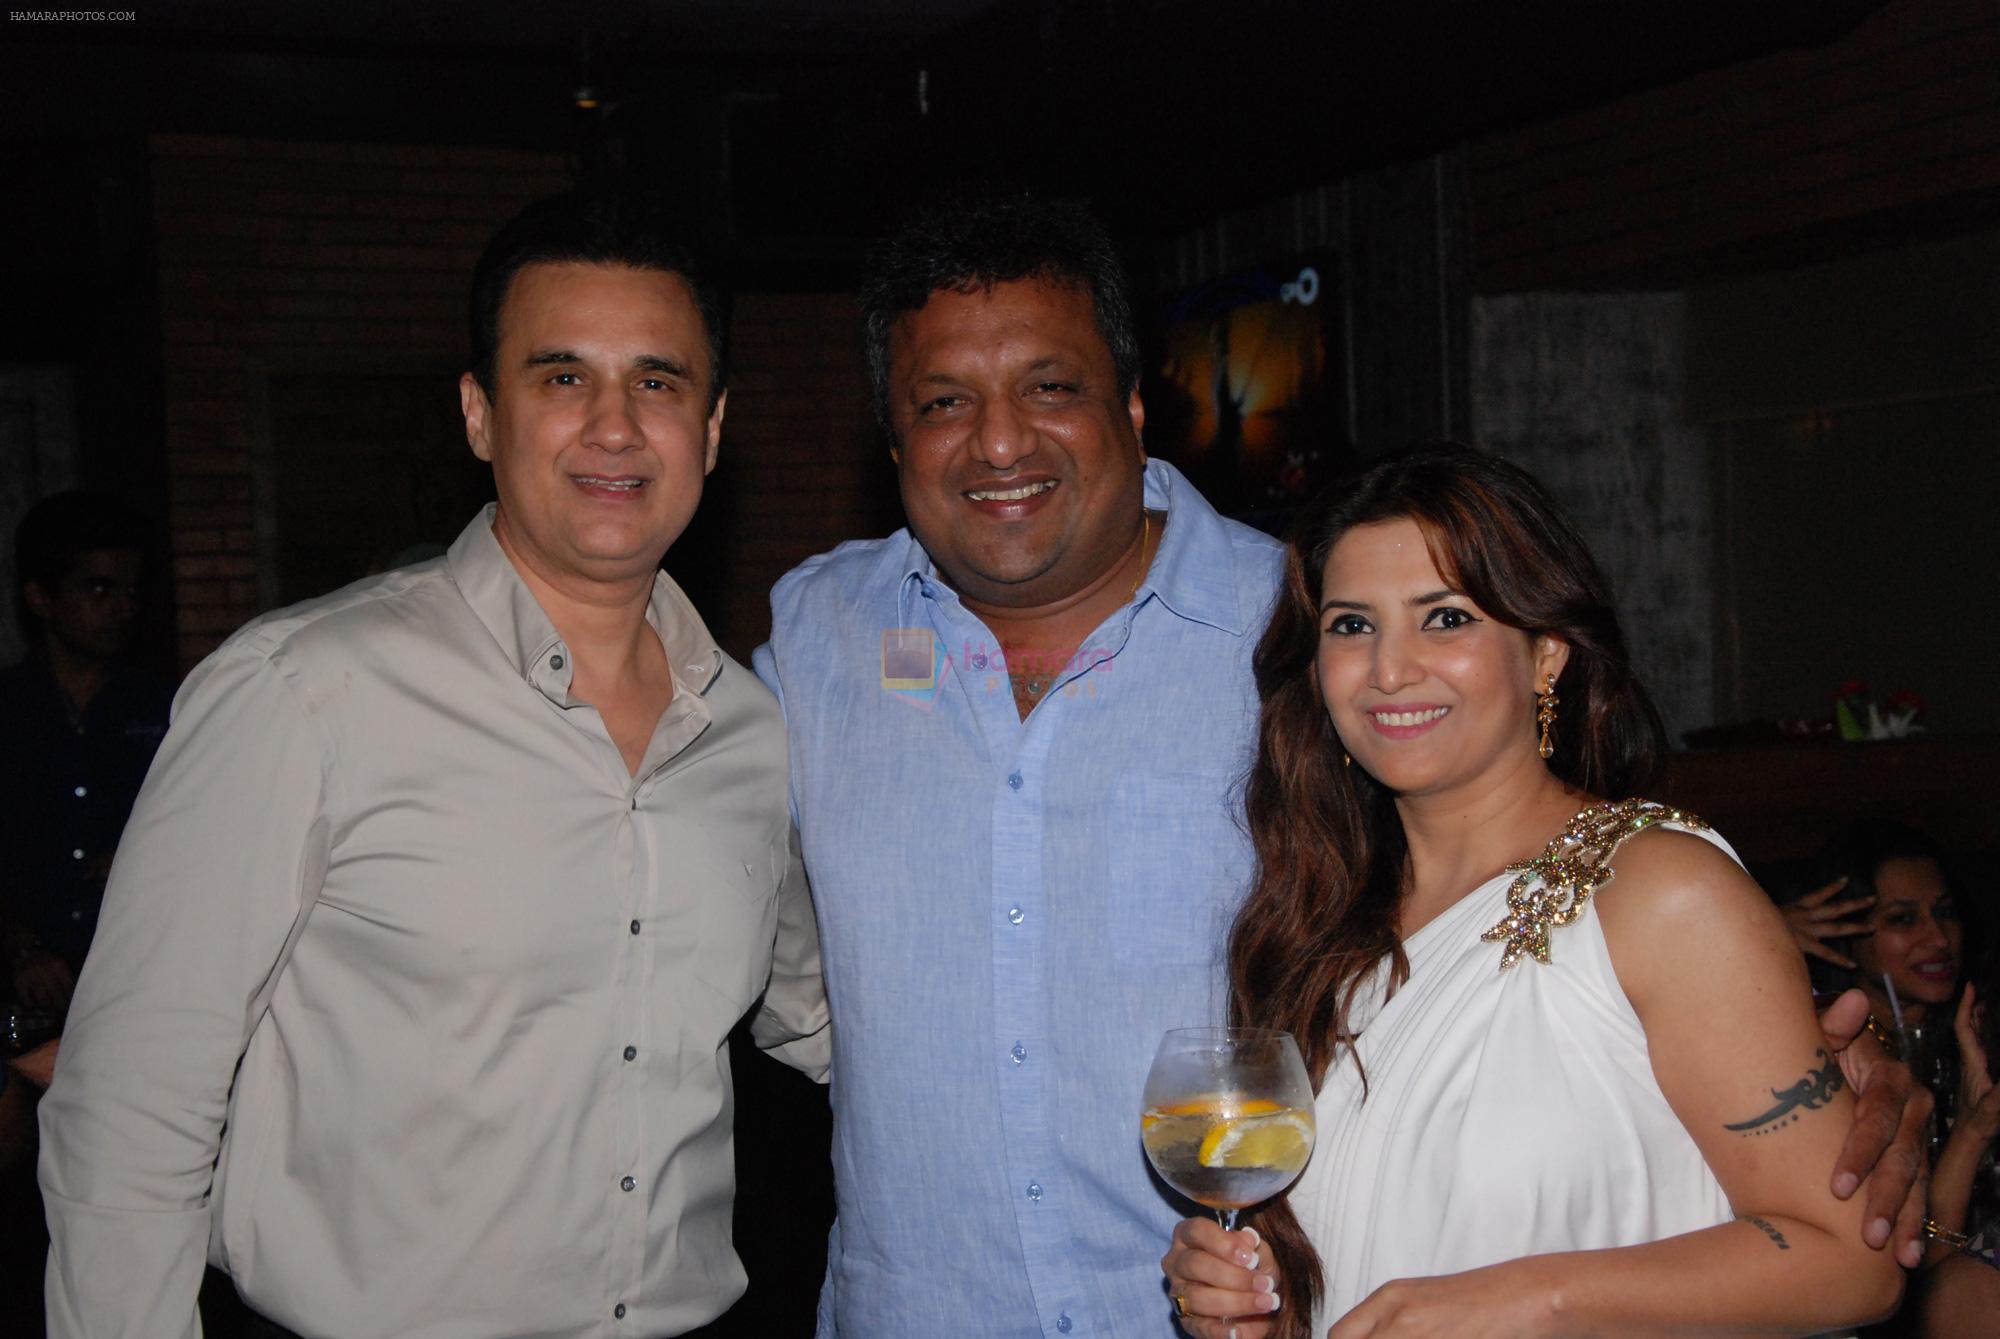 Bunty & Molly  Bahl celebrate their anniversary at Harry's Bar & cafe